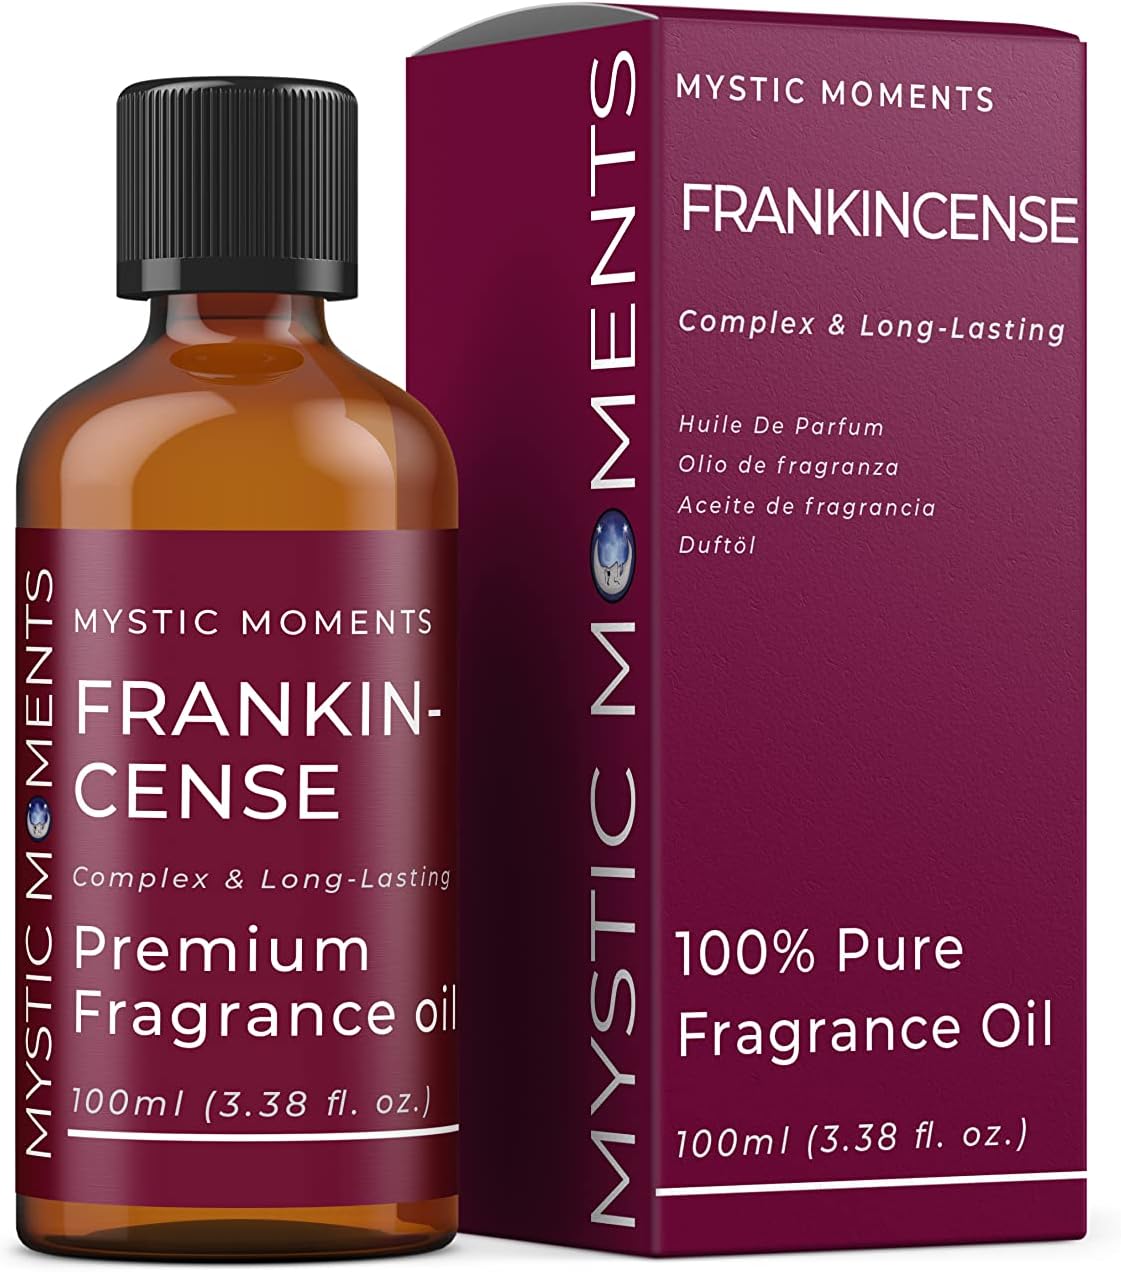 Mystic Moments | Frankincense Fragrance Oil - 100ml - Perfect for Soaps, Candles, Bath Bombs, Oil Burners, Diffusers and Skin & Hair Care Items